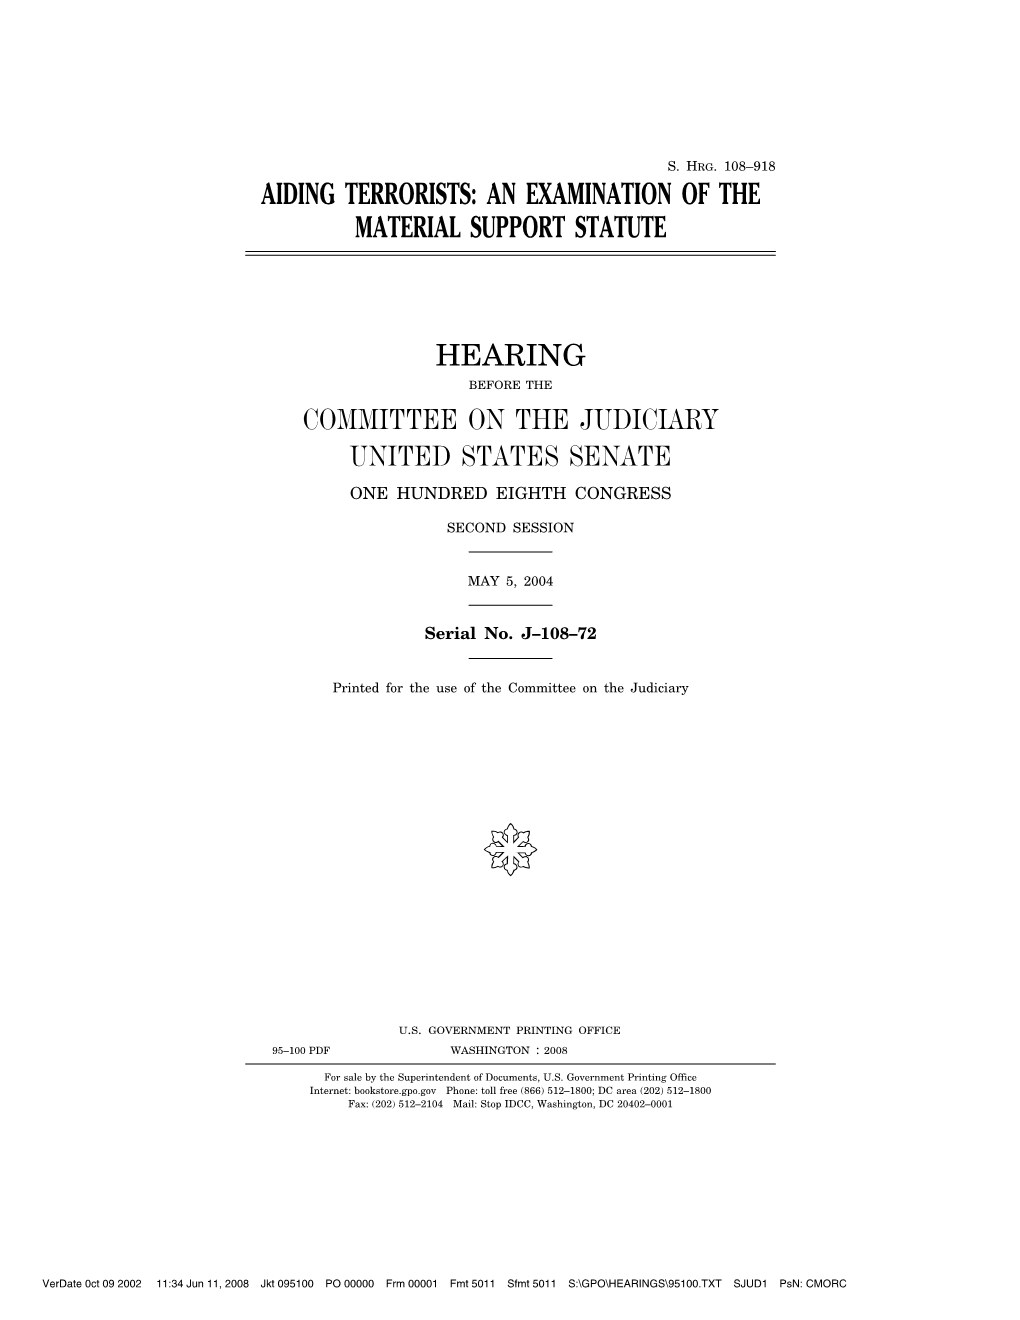 Aiding Terrorists: an Examination of the Material Support Statute